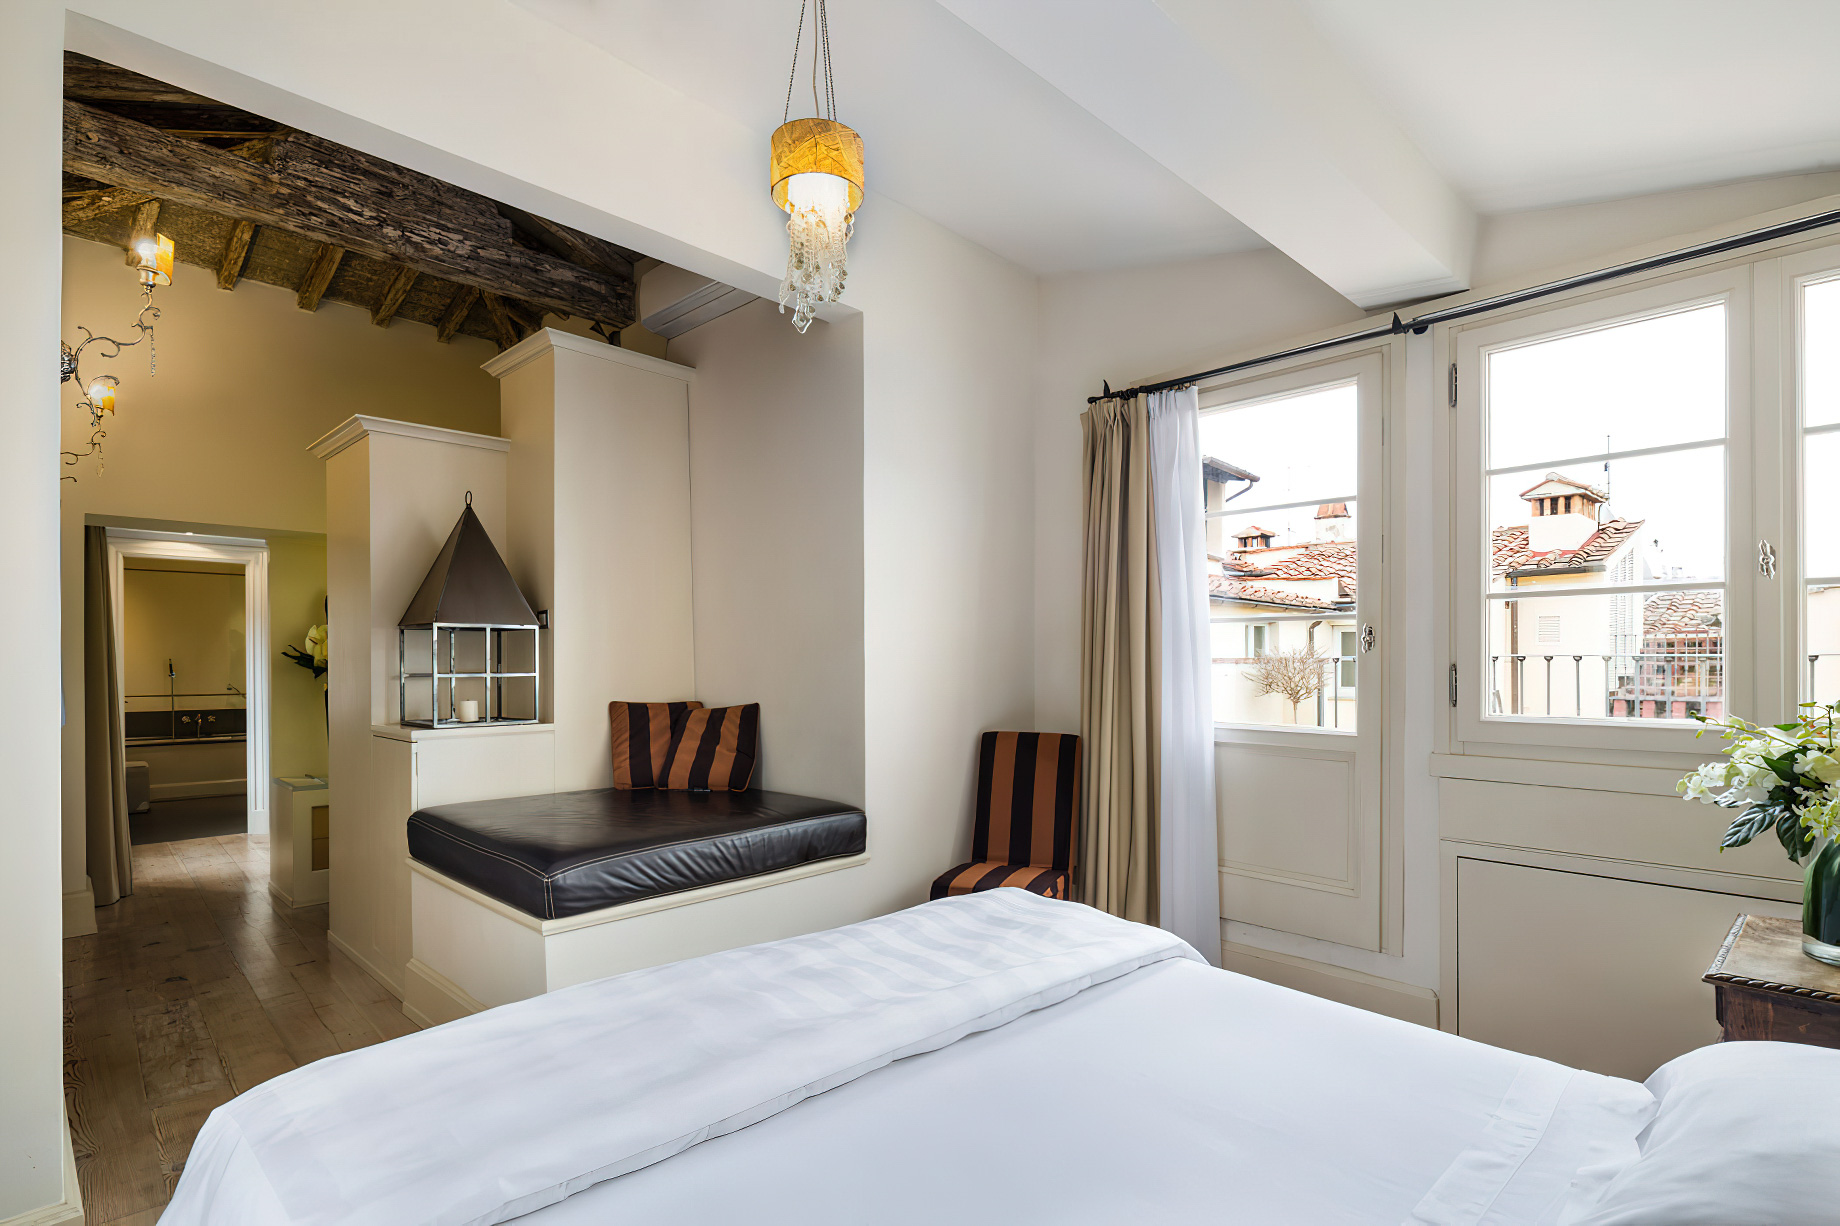 Relais Santa Croce By Baglioni Hotels & Resorts - Florence, Italy - Terrace Junior Suite